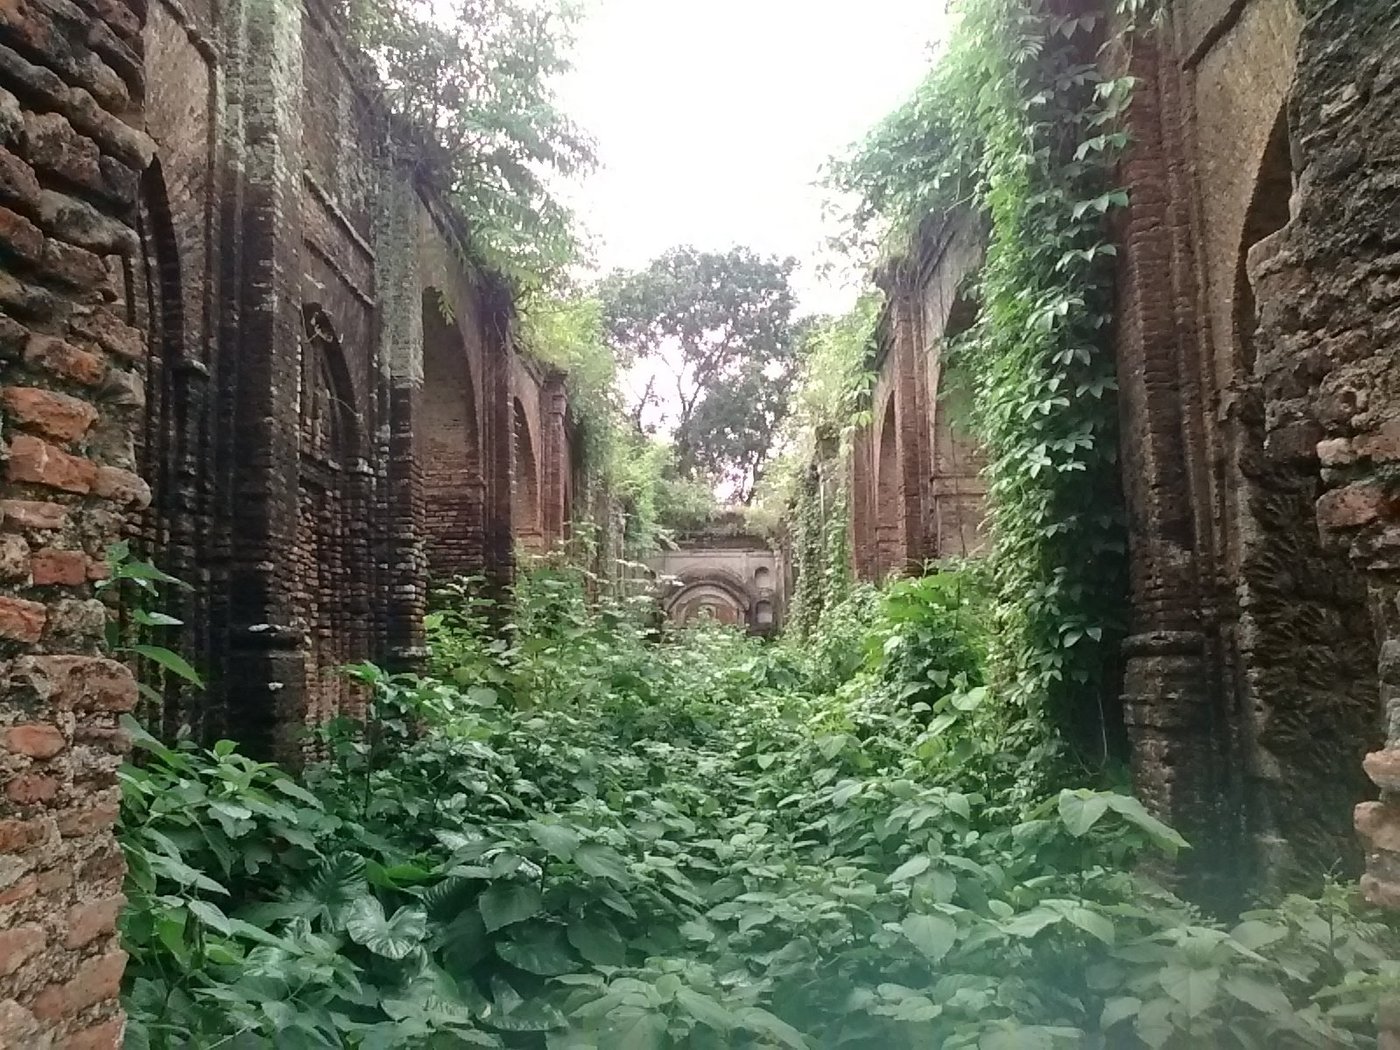 A photographs showing the ruins of the palace and temples built by Rani Bhabani, Murshidabad, partly overgrown with plants